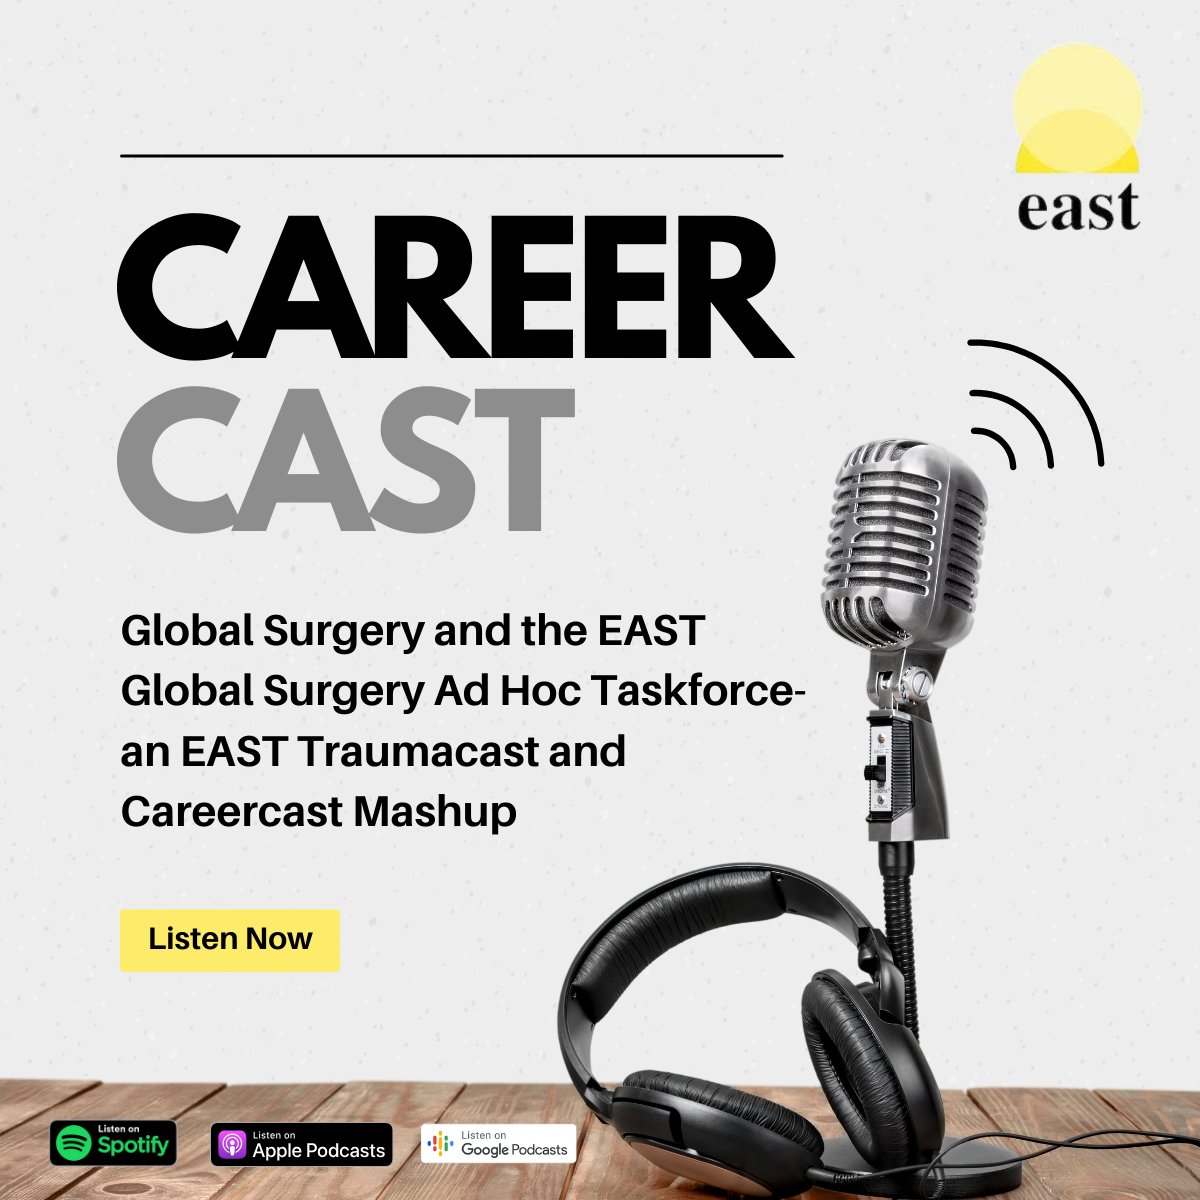 Join your EAST Careercast & Traumacast hosts @ldel302 @ladha_prerna & @HassanMashbari discuss Global Surgery w/ @ChrisDodgion @mikemmallahmd & Katie Iverson. What is it about, what resources are out there to get support & get involved?  @MUSCGlobalSurg bit.ly/3OilgQE